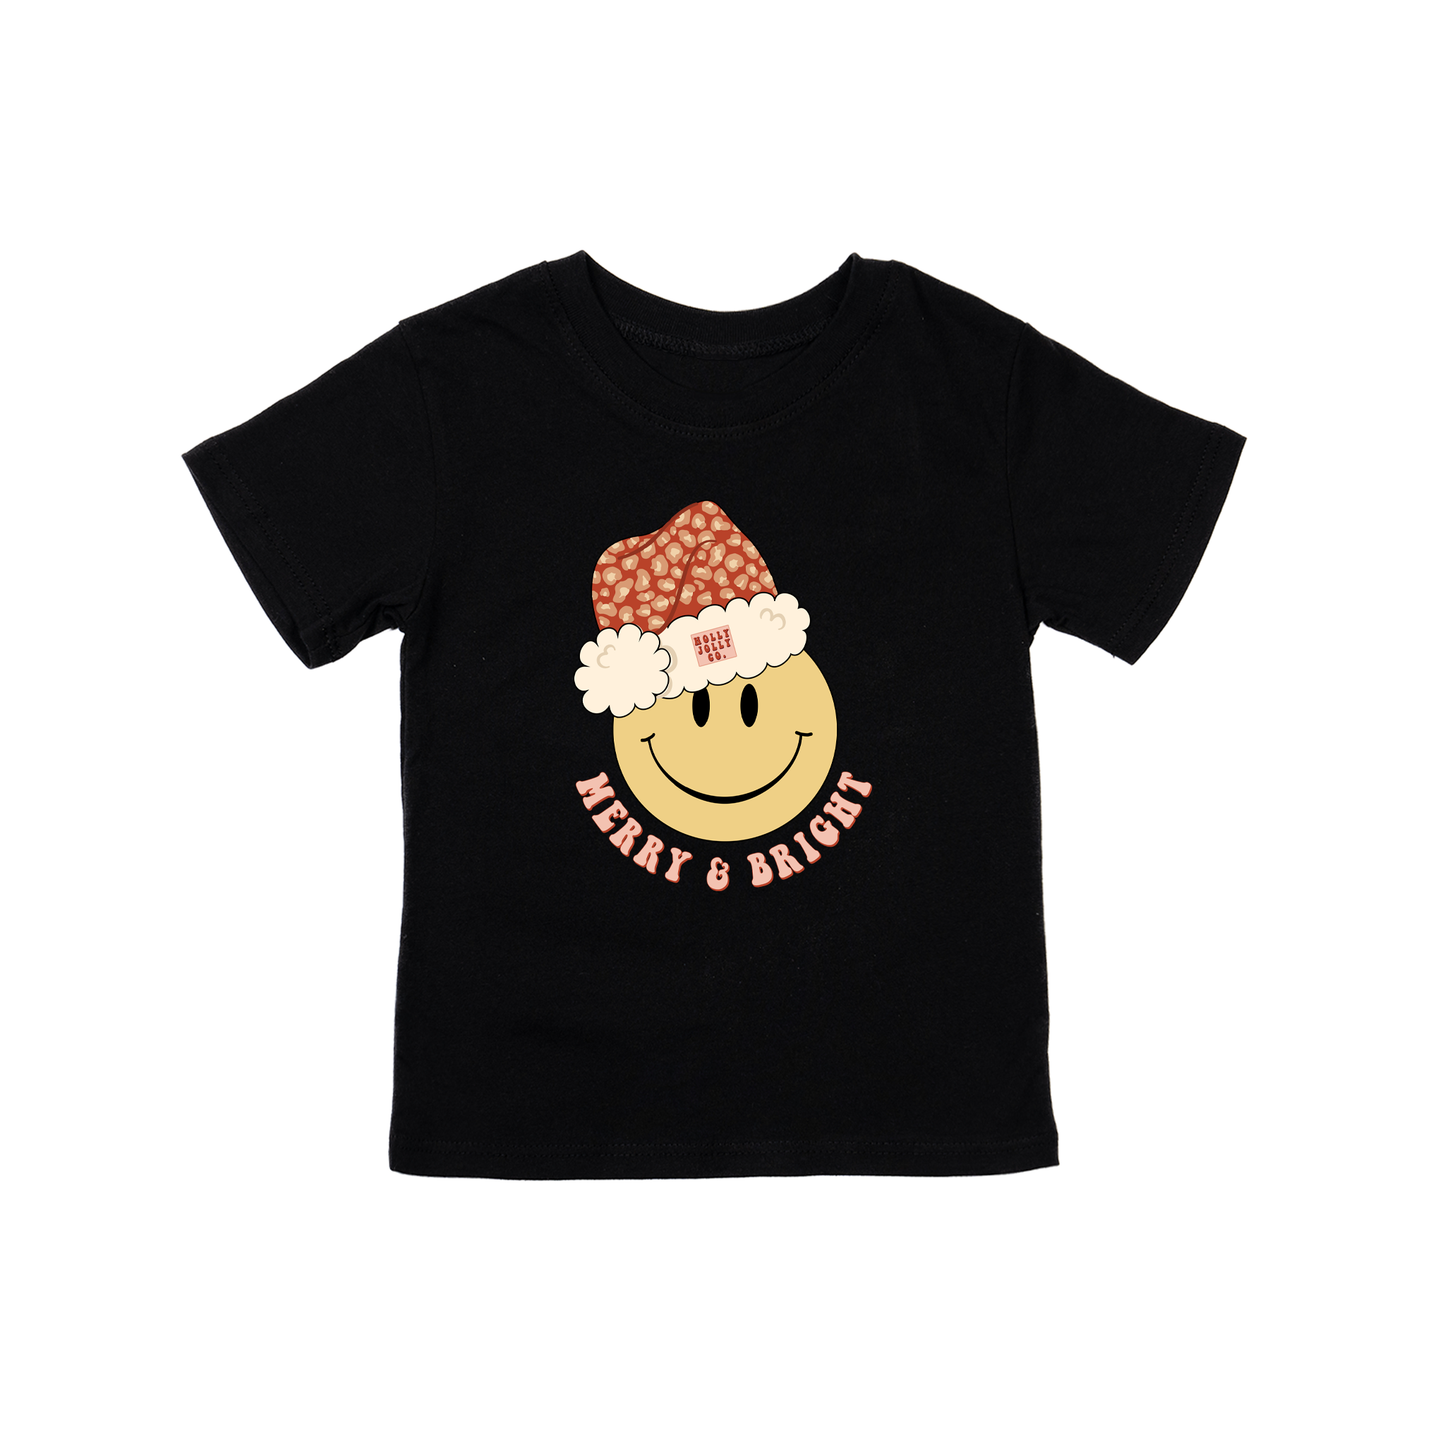 Merry & Bright Smiley Face - Kids Tee (Black)